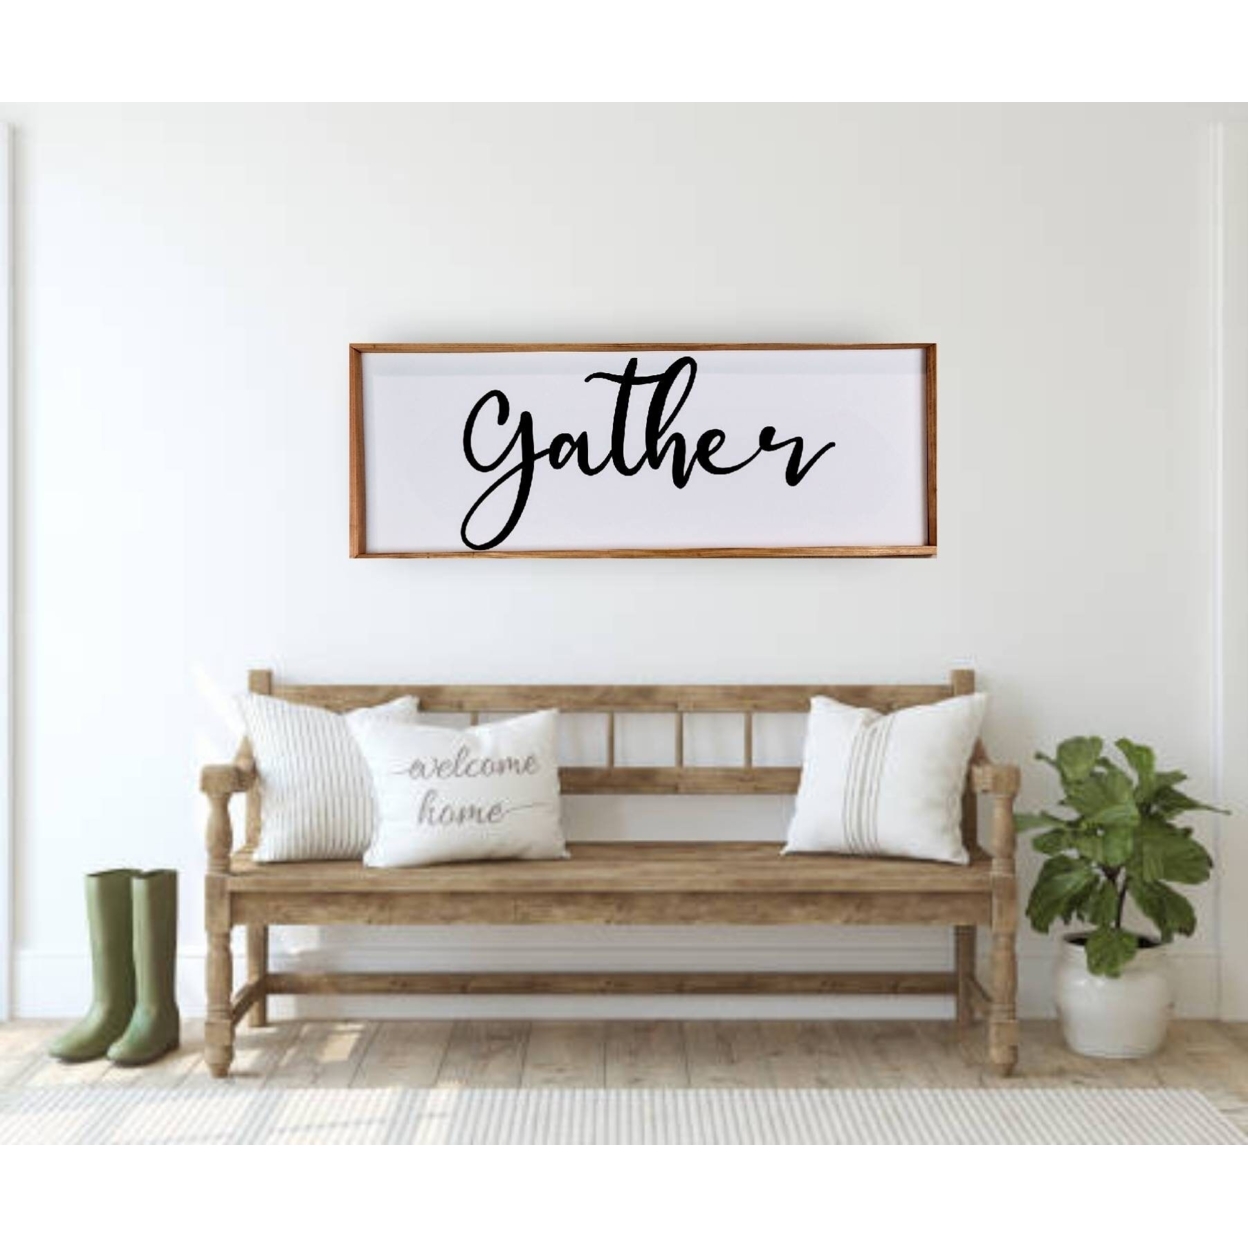 Gather Framed Sign - rustic decor - farmhouse decor- framed sign- shelf sign- kitchen decor- sign- decor- dining room sign - - Special walnut